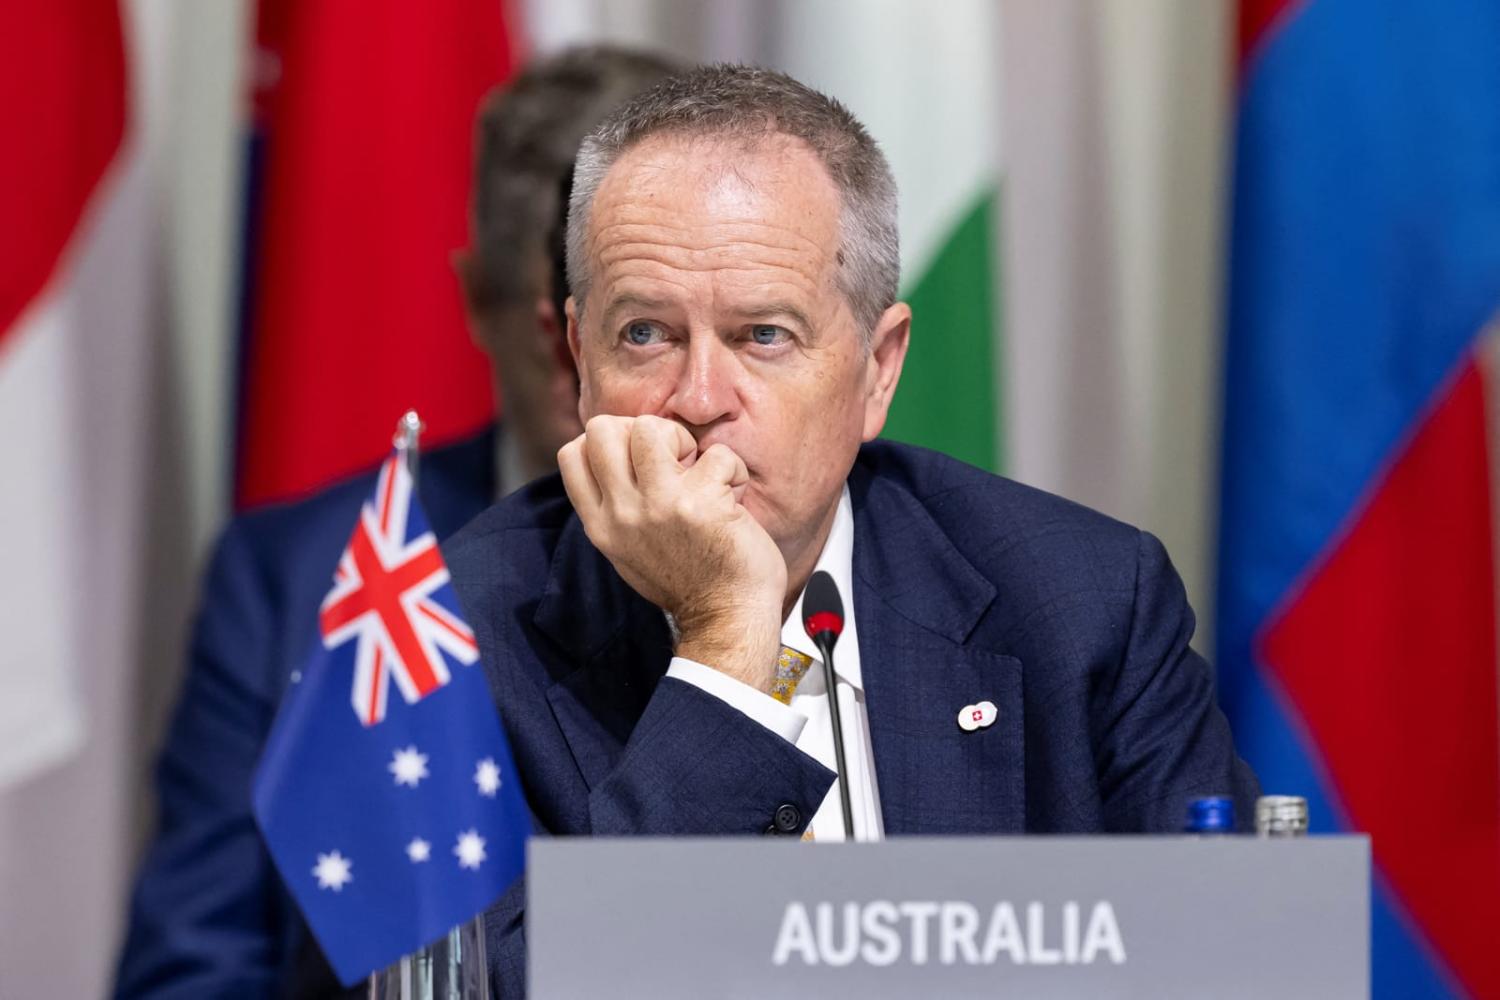 Bill Shorten attends a plenary session during the Summit on peace in Ukraine at the Burgenstock resort, near Lucerne, on 16 June (Urs Flueeler via AFP/Getty Images)